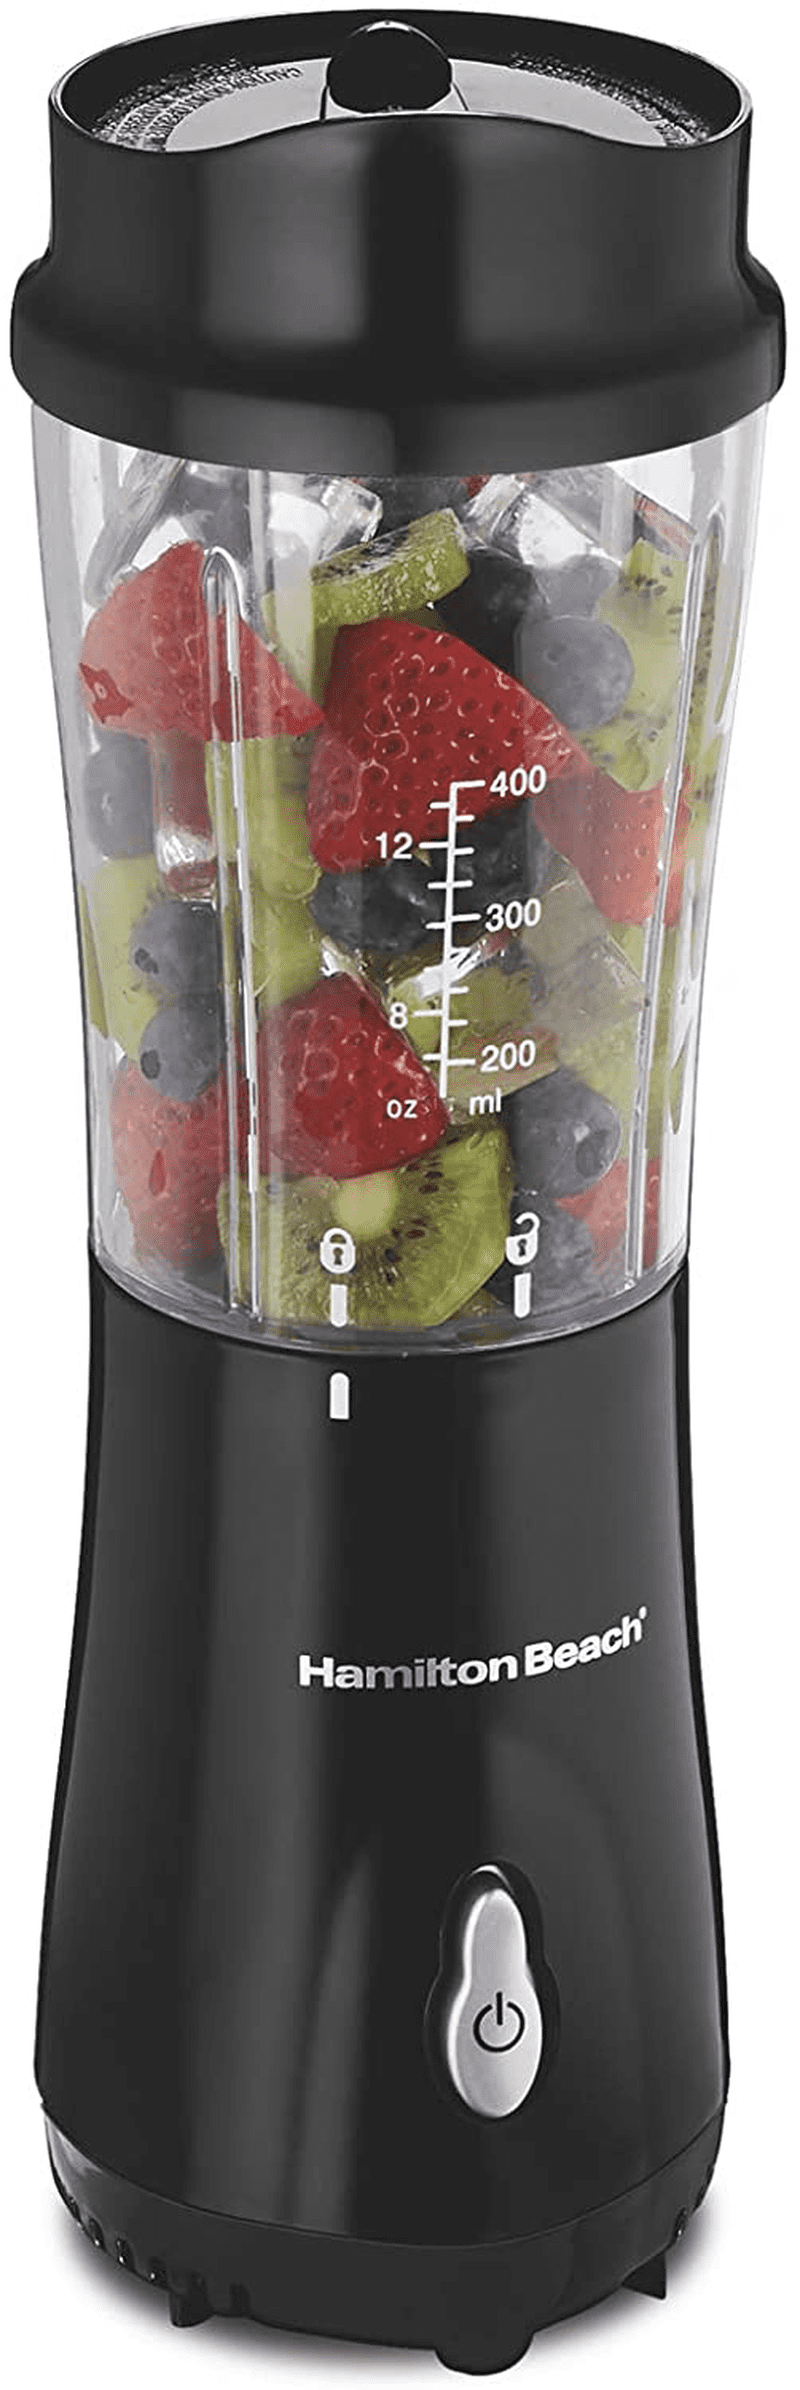 Hamilton Beach Personal Blender for Shakes and Smoothies with 